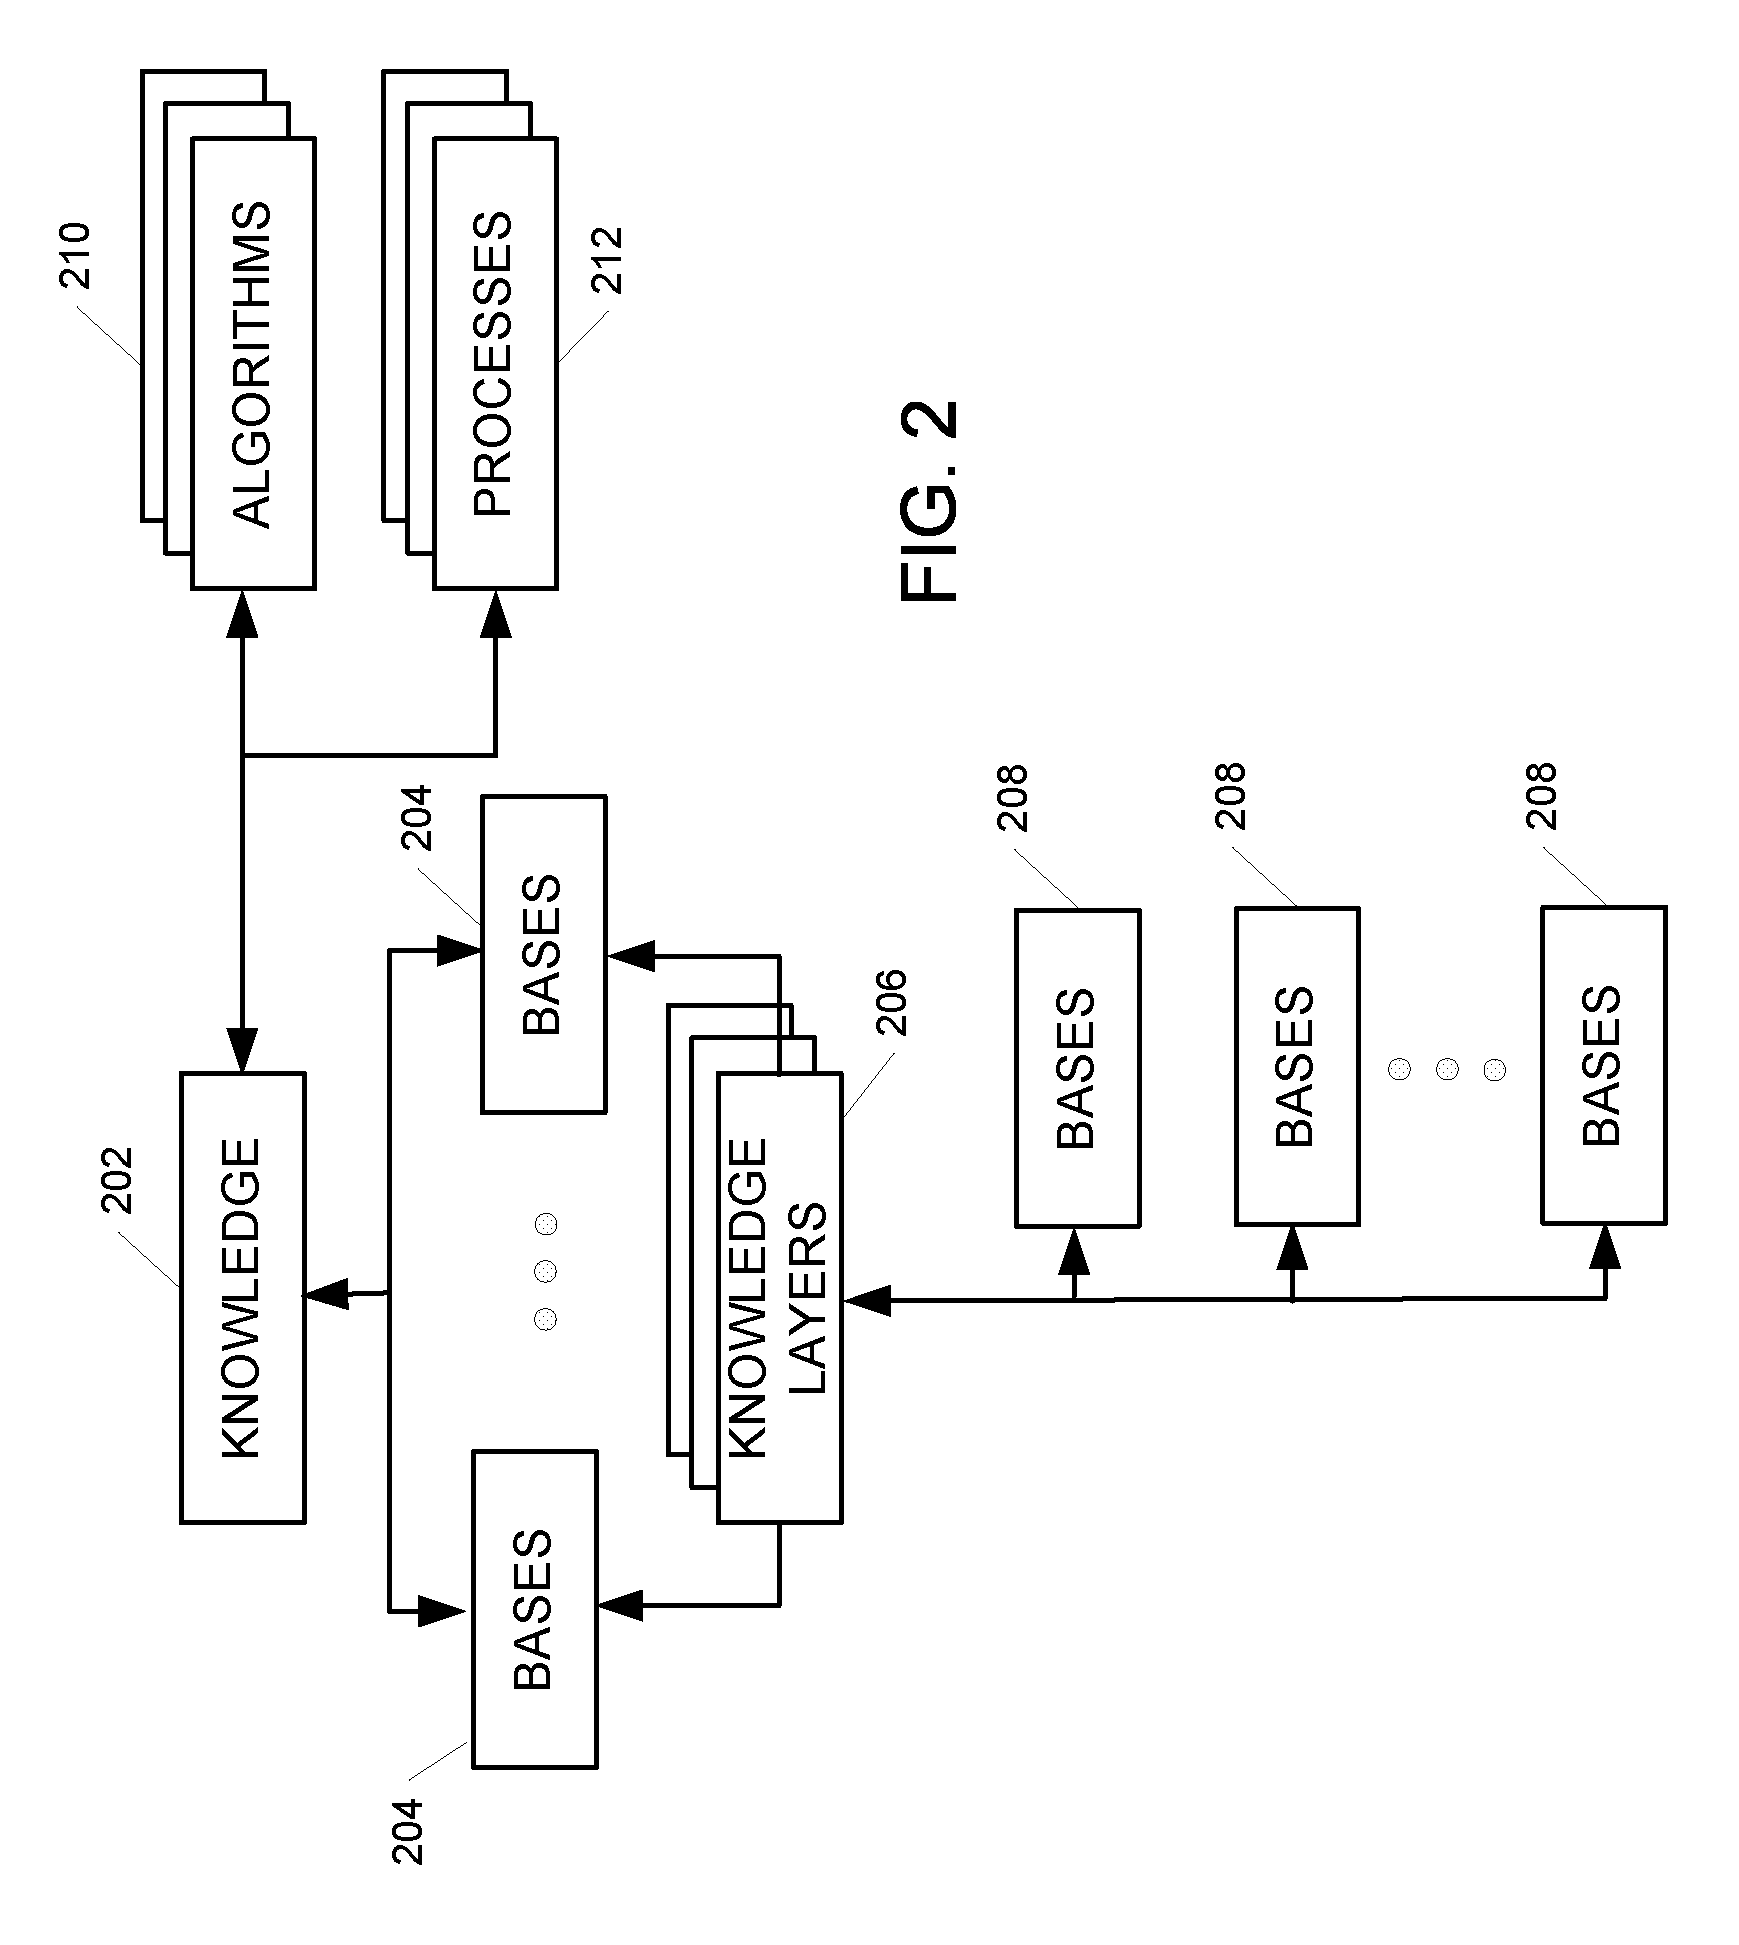 Systems and Methods for Generating and Implementing an Interactive Man-Machine Web Interface Based on Natural Language Processing and Avatar Virtual Agent Based Character